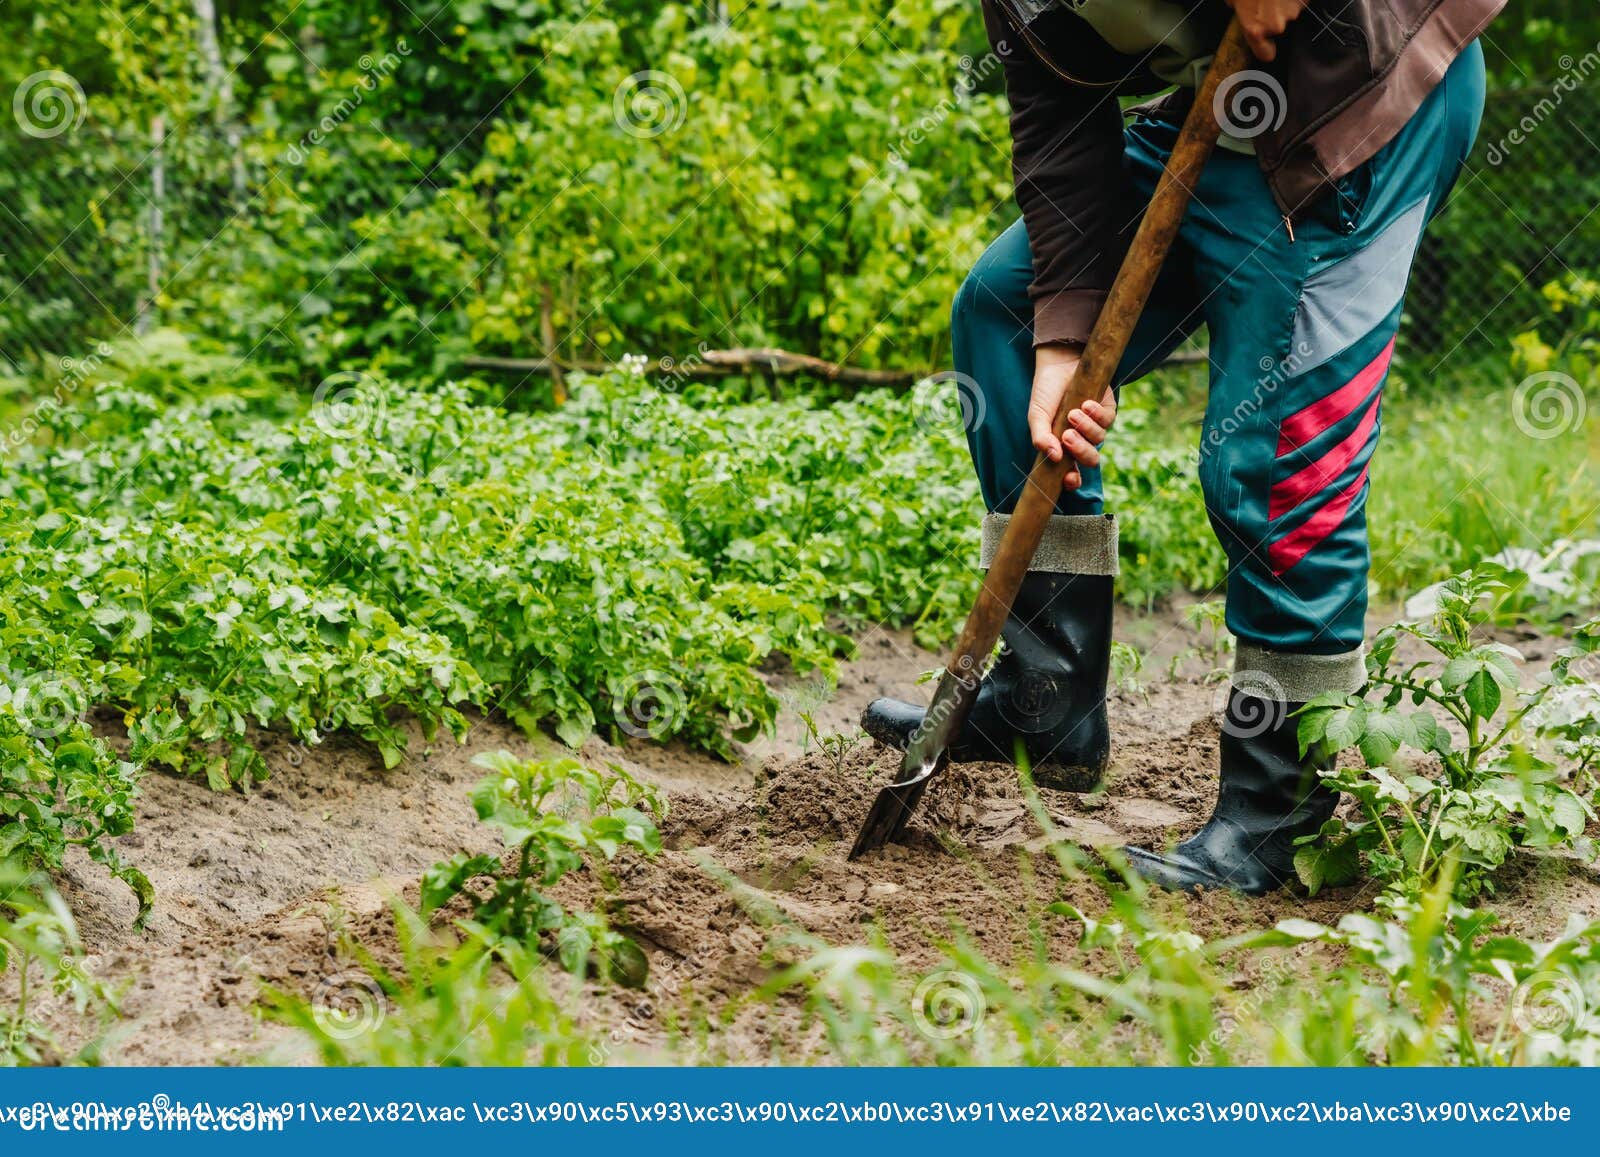 Man Digs a Hole in the Ground for Planting Trees Stock Photo - Image of ...